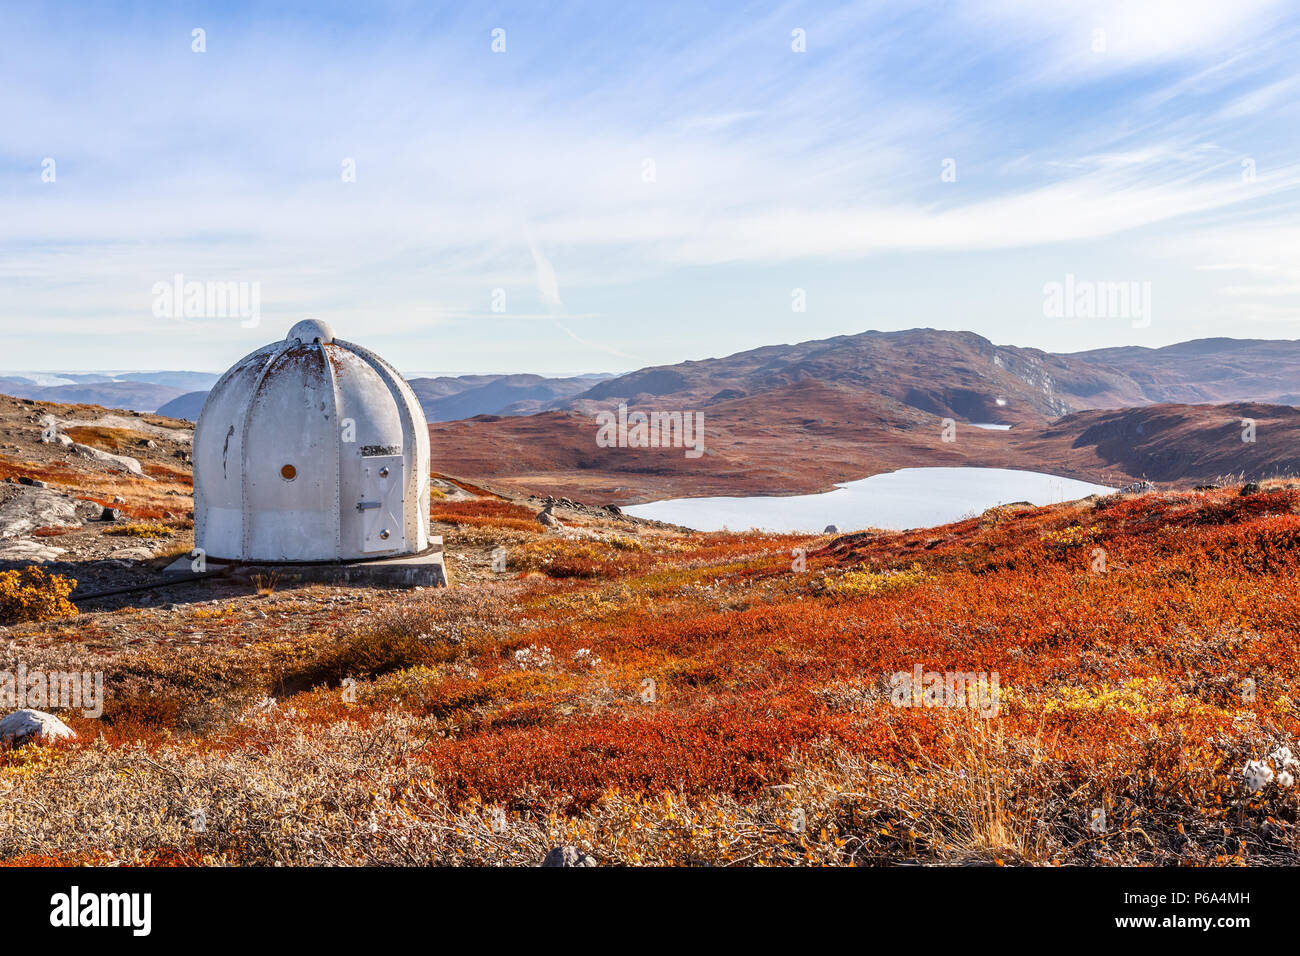 Metal US bunker and autumn greenlandic orange tundra landscape with lakes and mountains in the background, Kangerlussuaq, Greenland Stock Photo